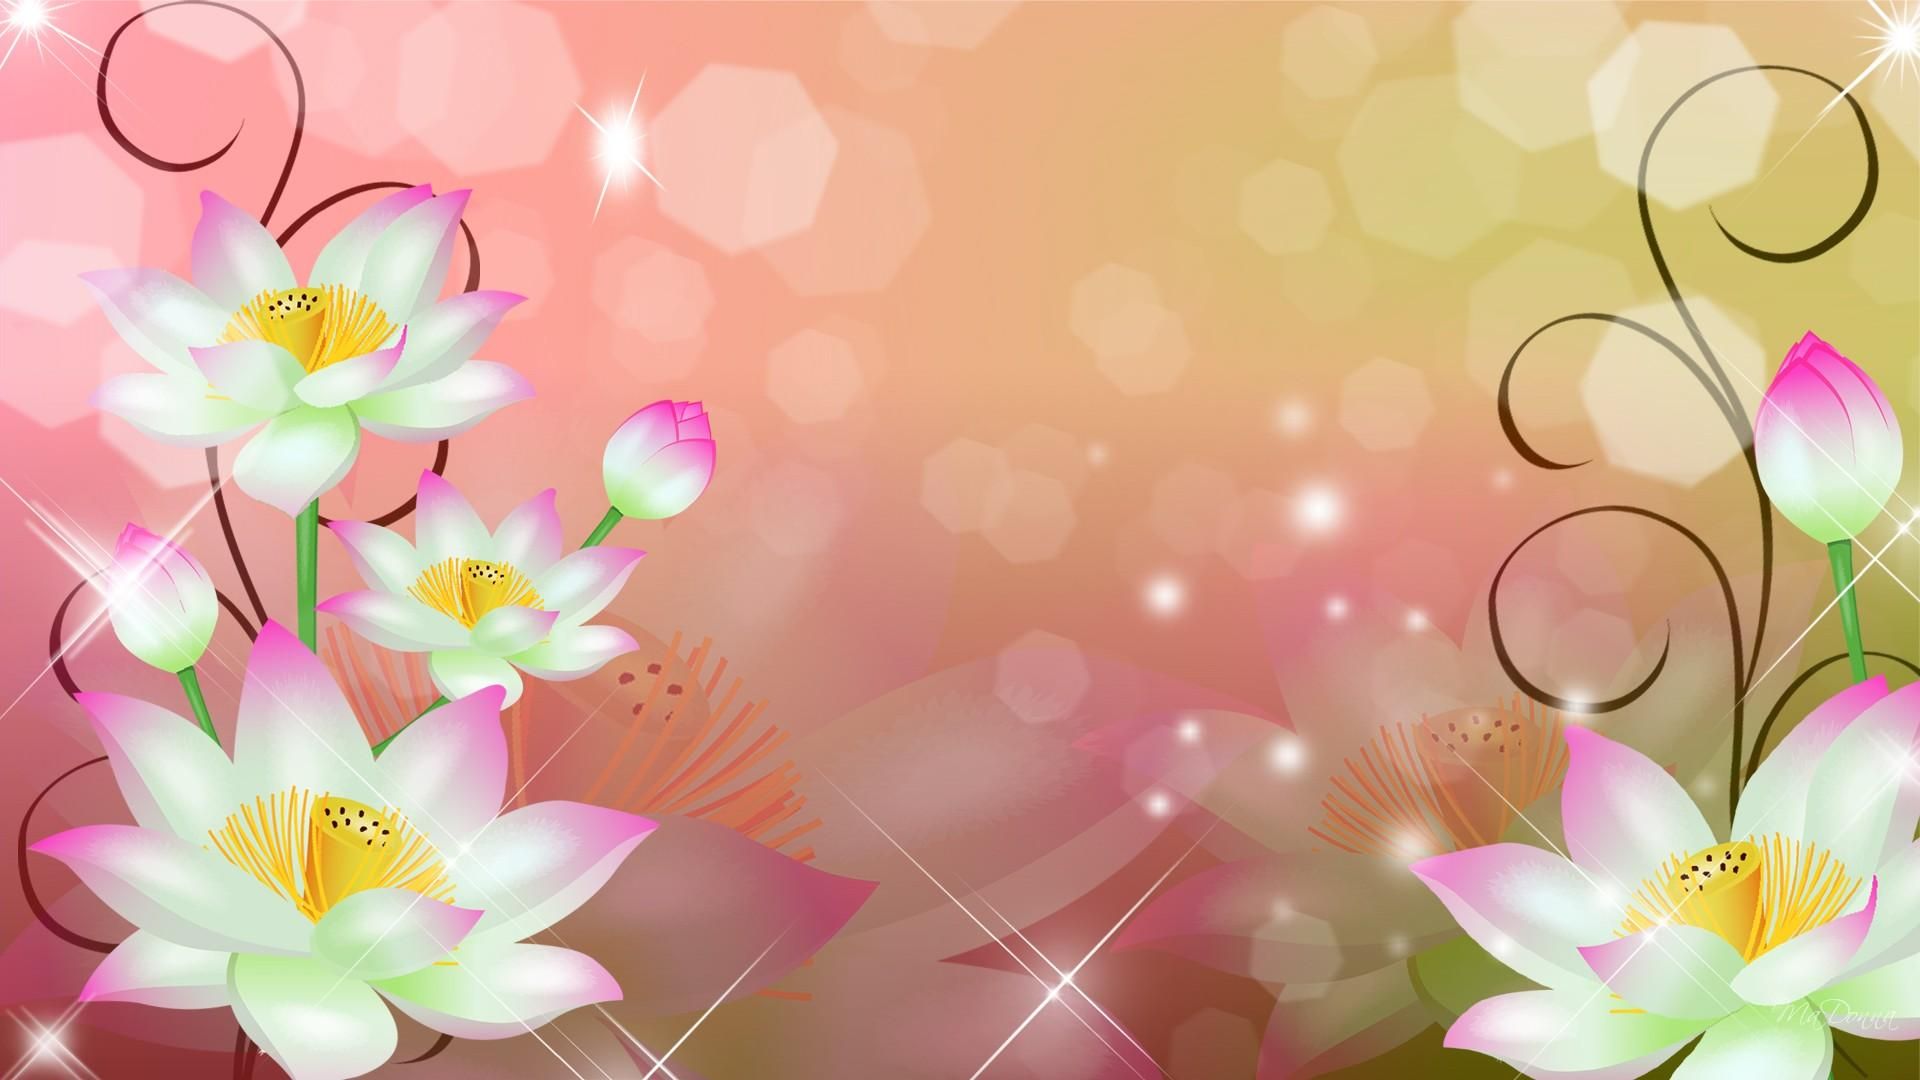 Abstract Flowers Wallpaper All Image Are